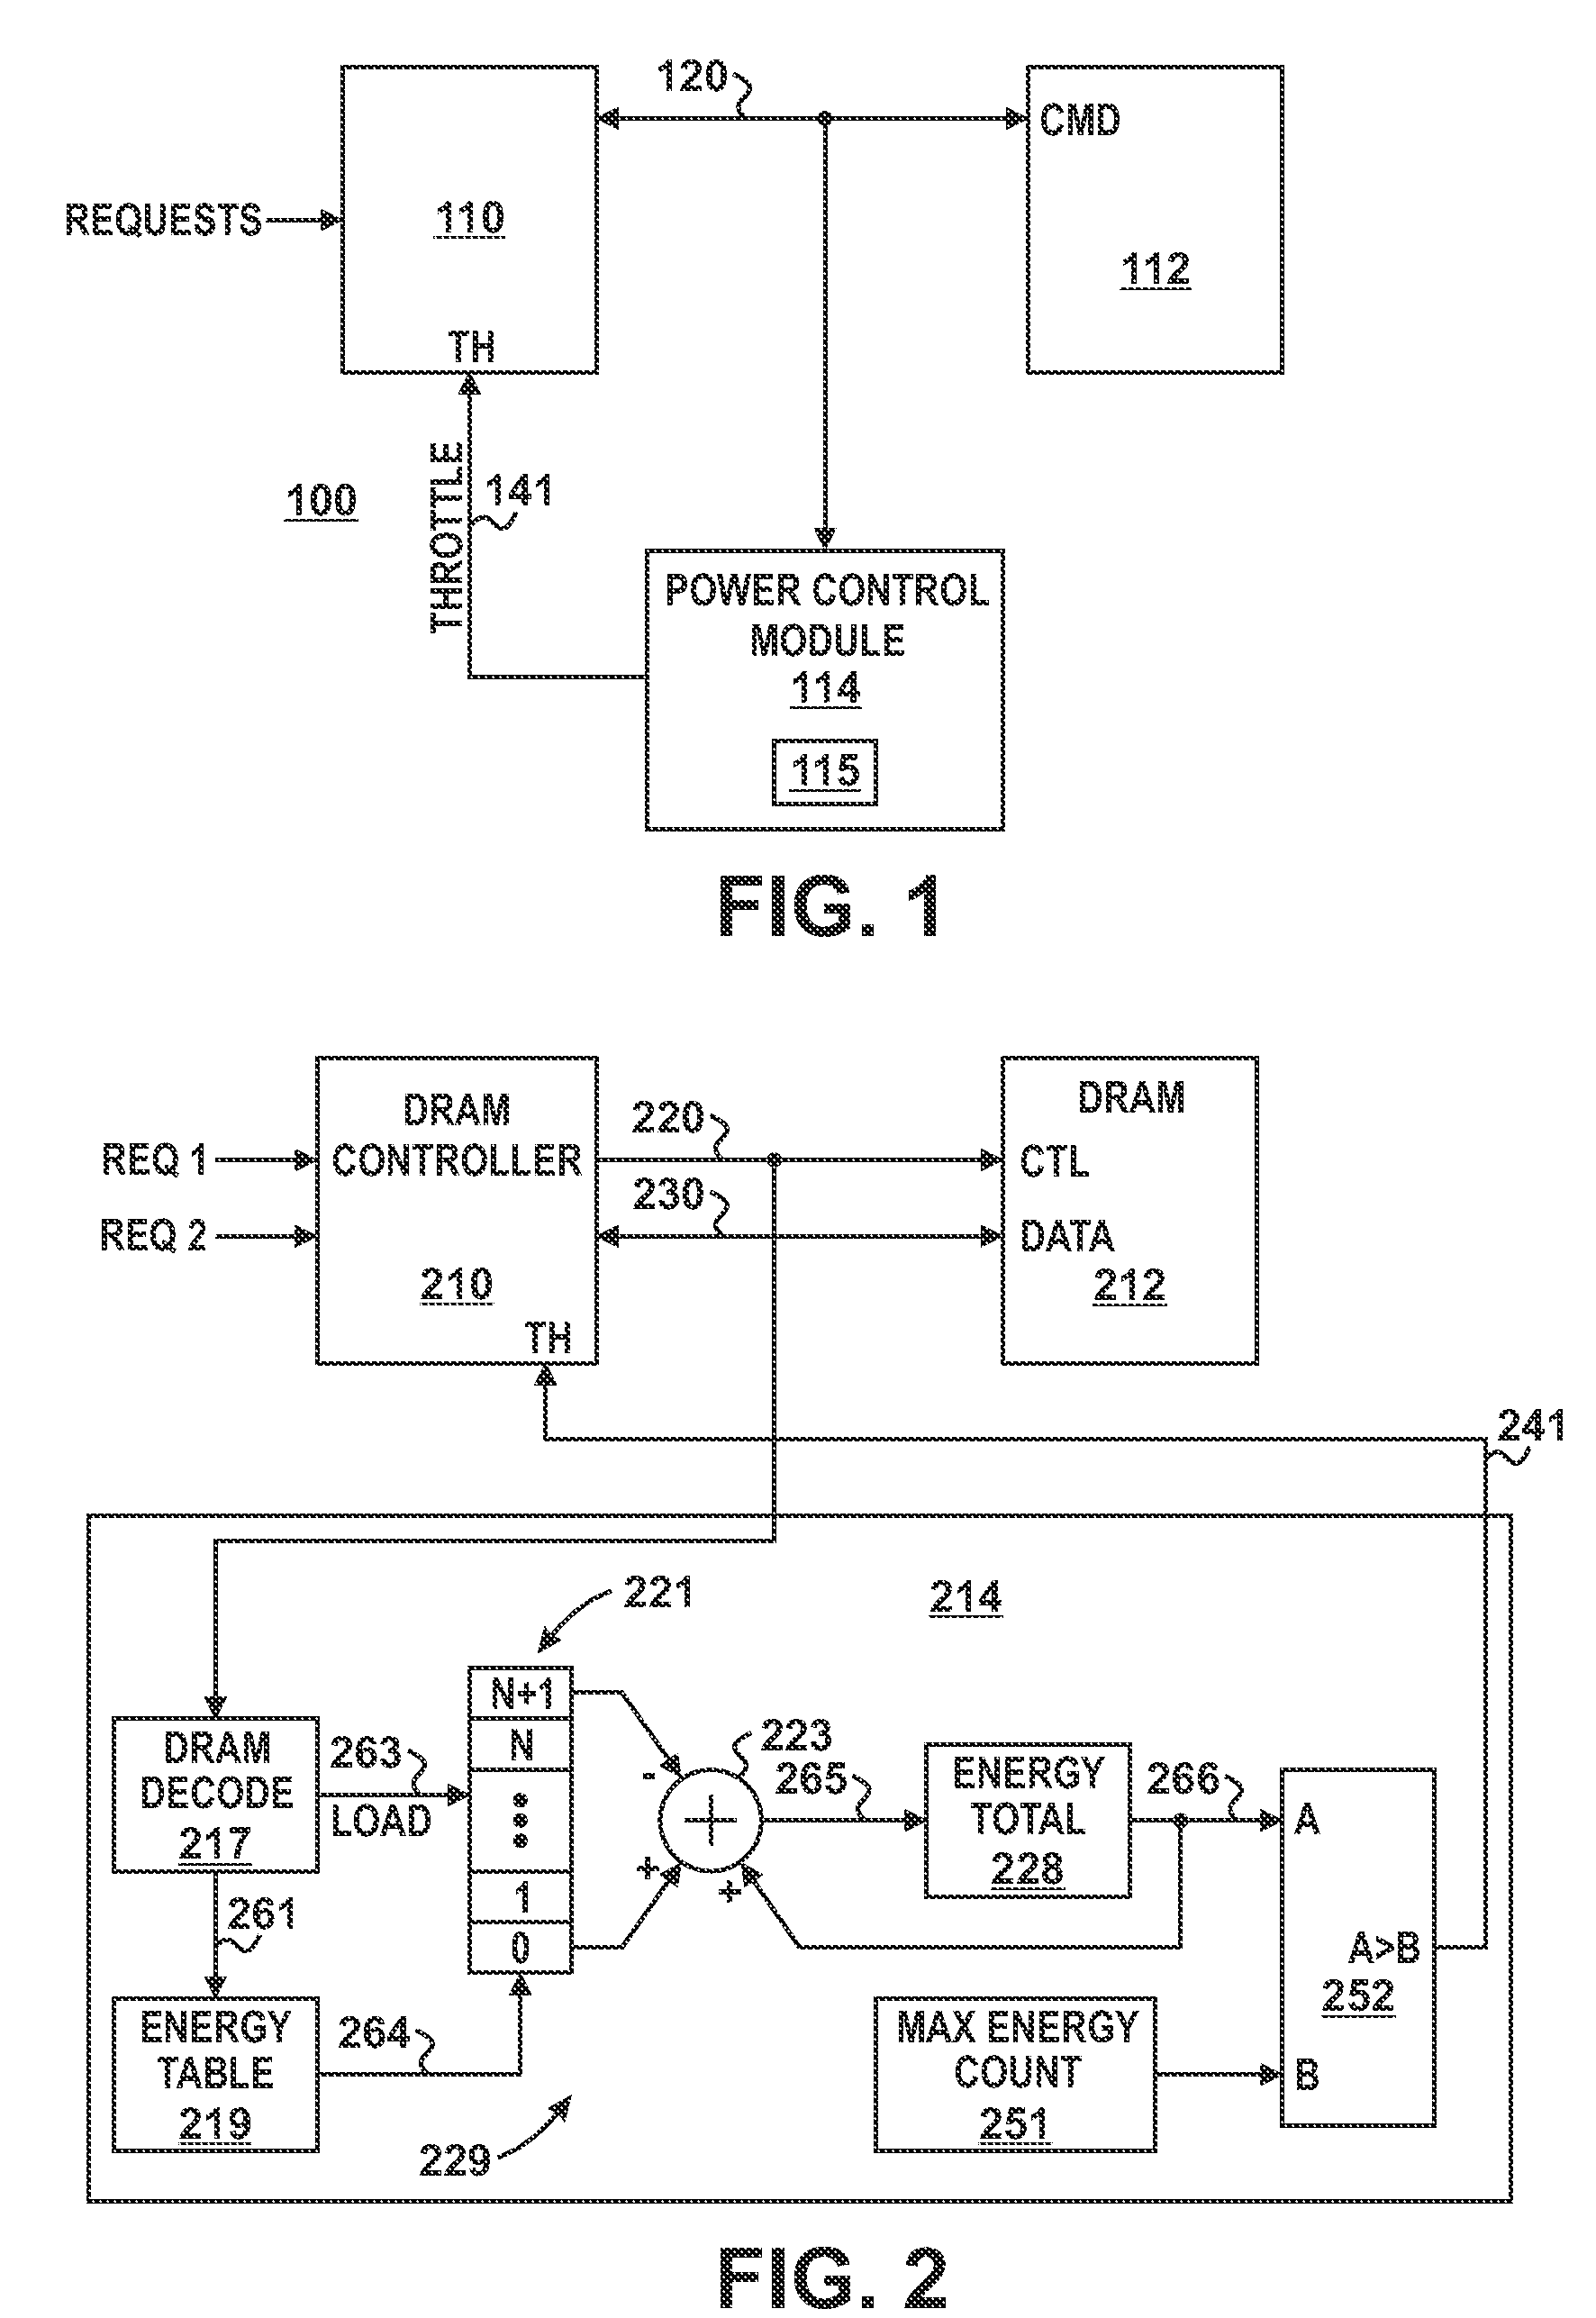 Method and apparatus for monitoring energy consumption of an electronic device